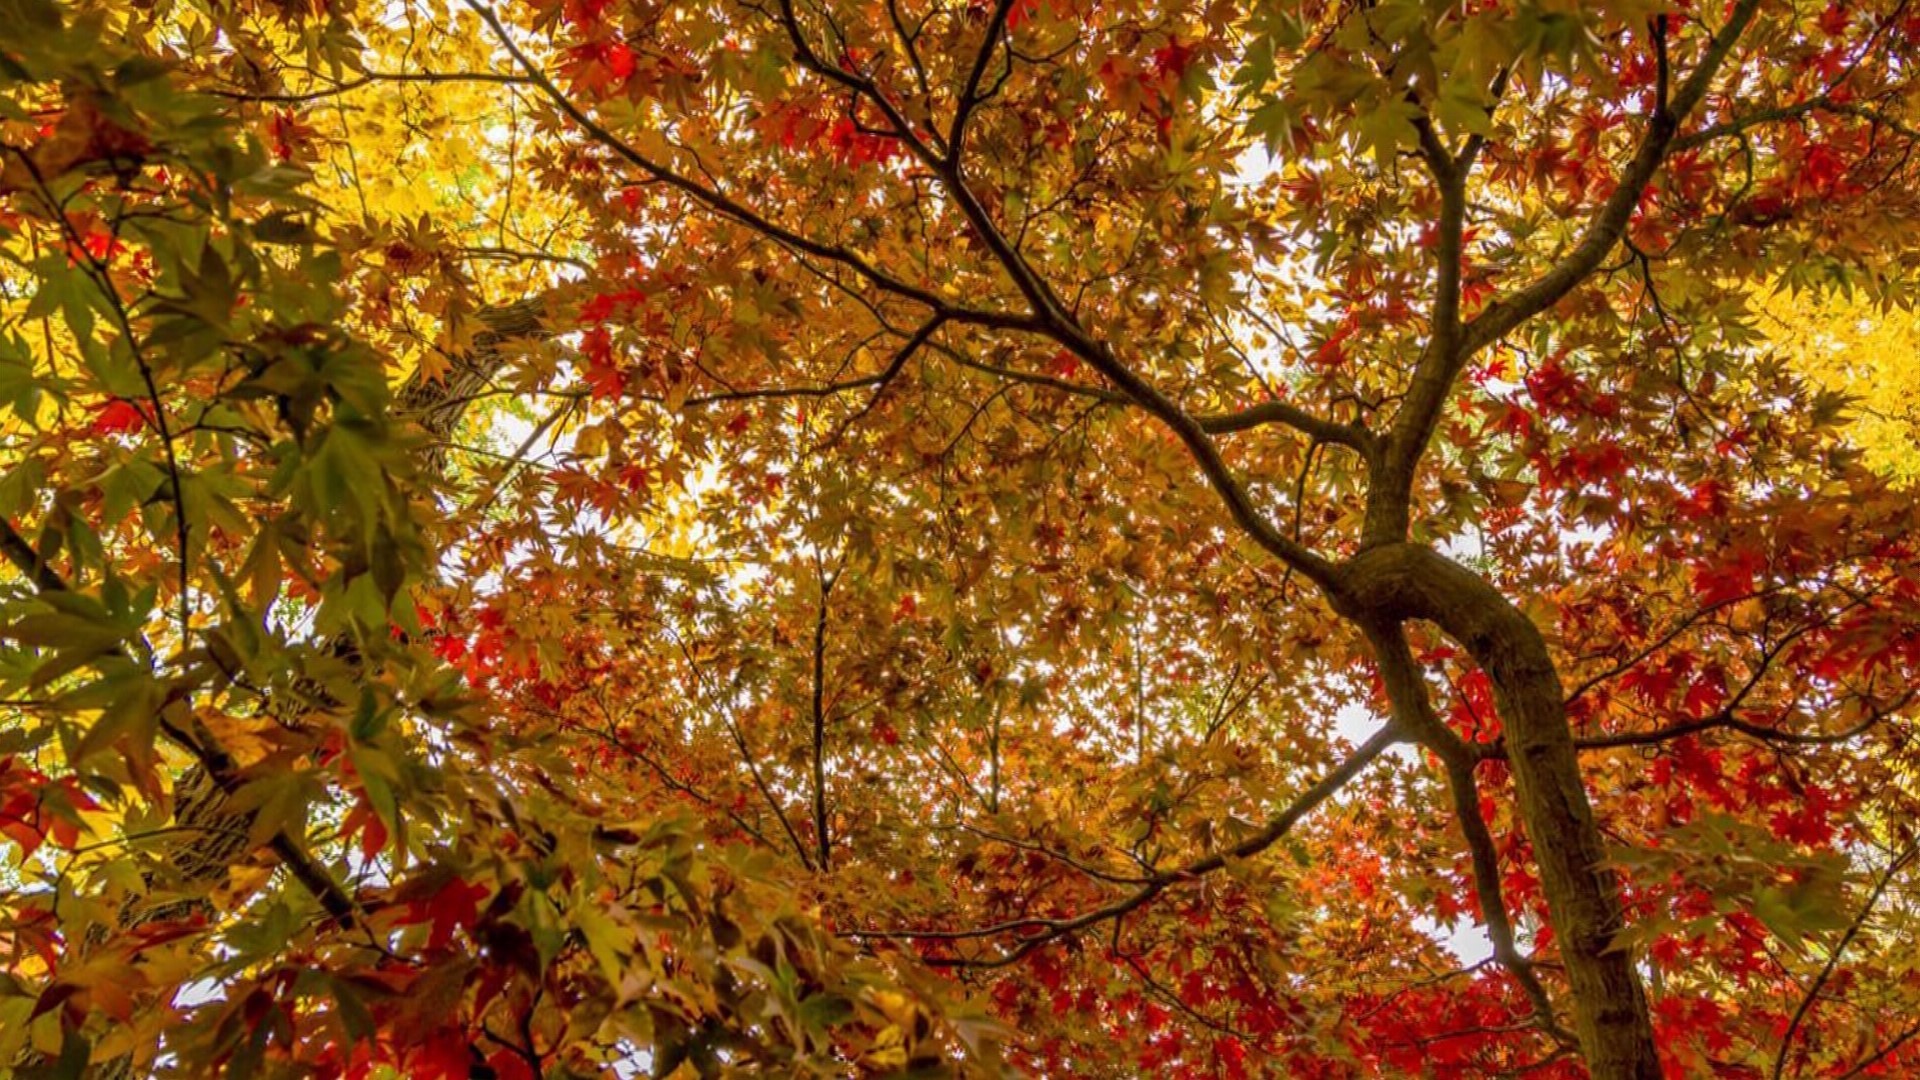 Length of day, temperature, and amount of sunshine all contribute to brilliant fall colors.